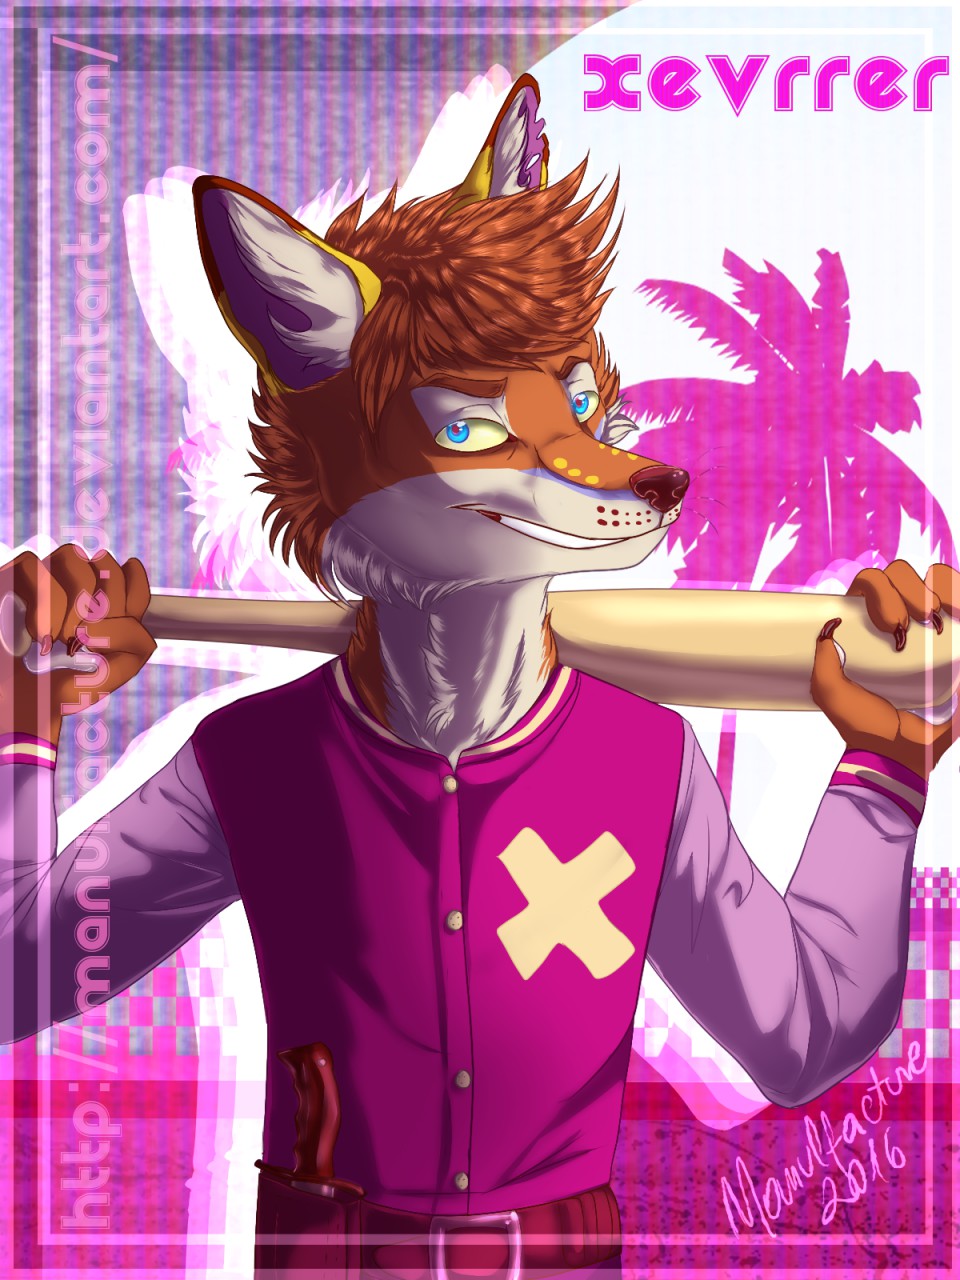 Jacket Hotline Miami Xevrrer Character By Manulfactur